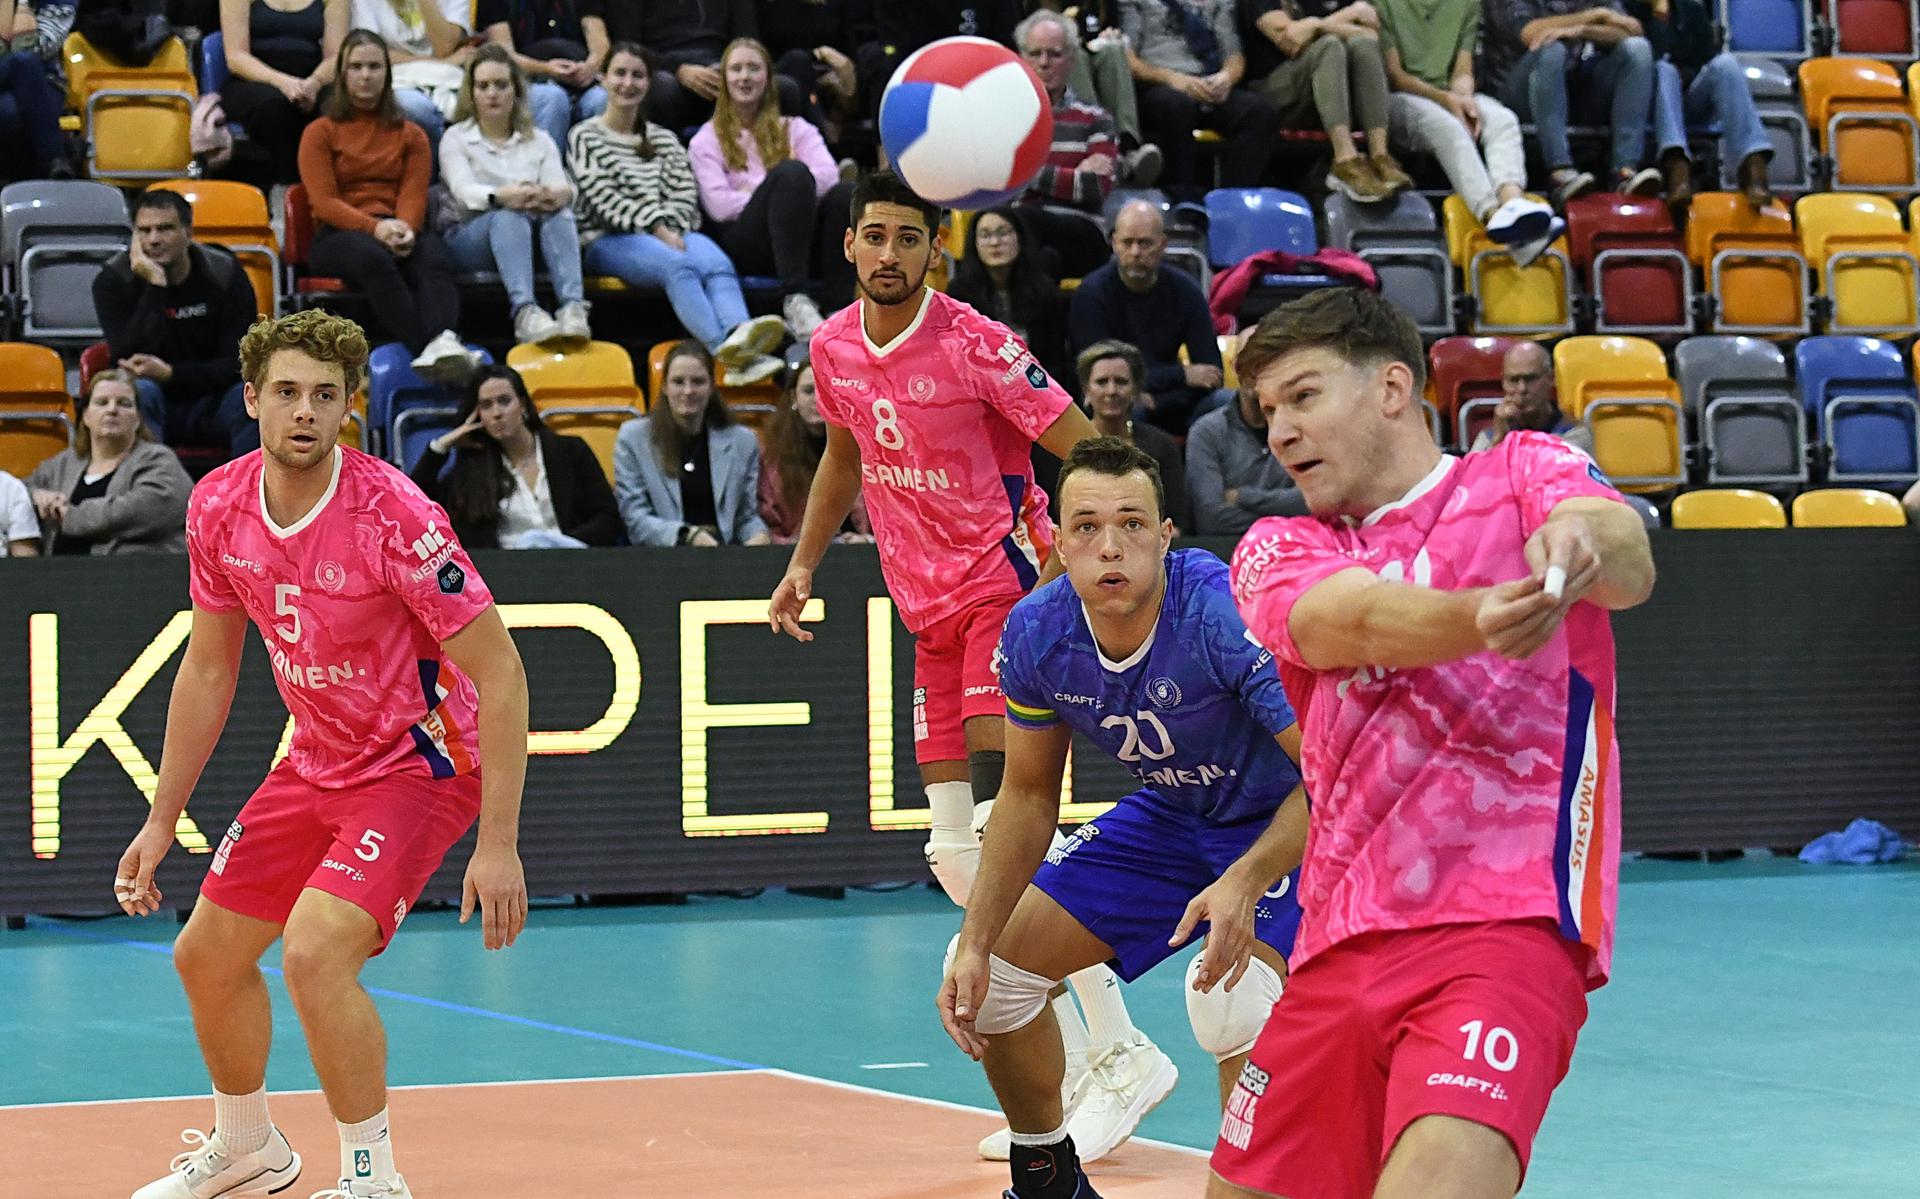 Well-performing volleyball team Lycurgus from Groningen beat Dynamo in Apeldoorn 3-1